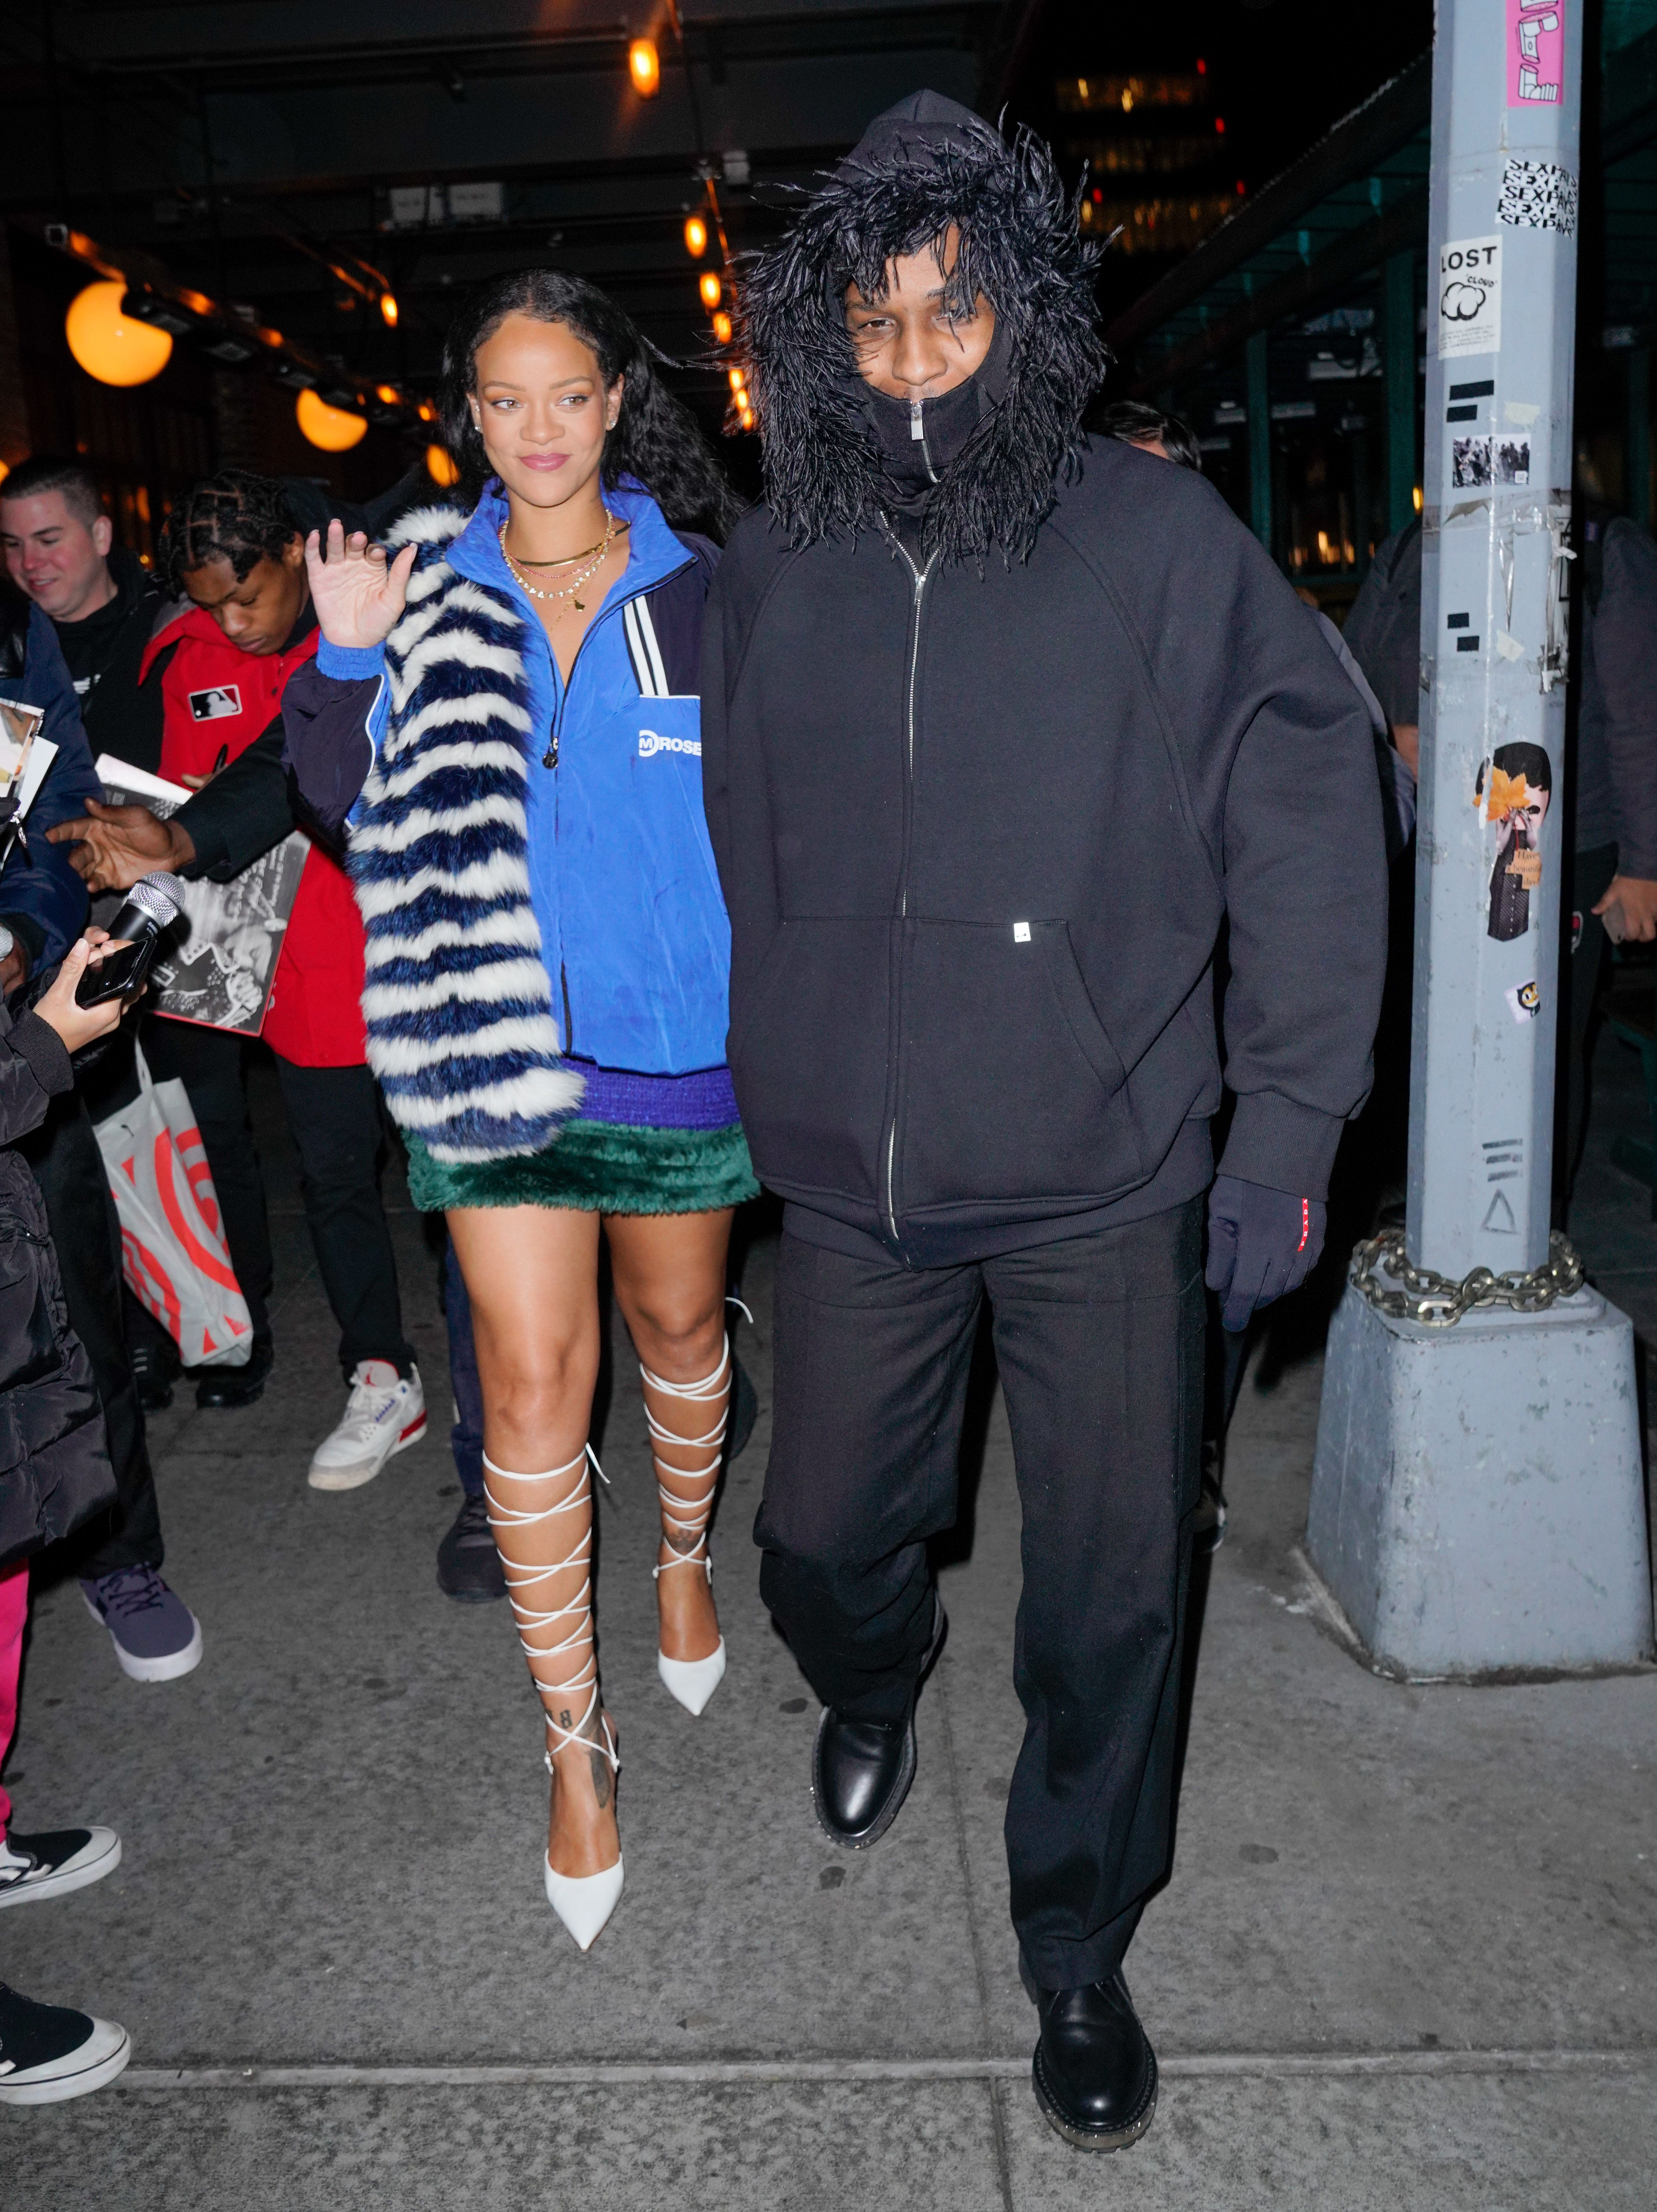 Rihanna Wears Lingerie During NYC Night Out Without ASAP Rocky